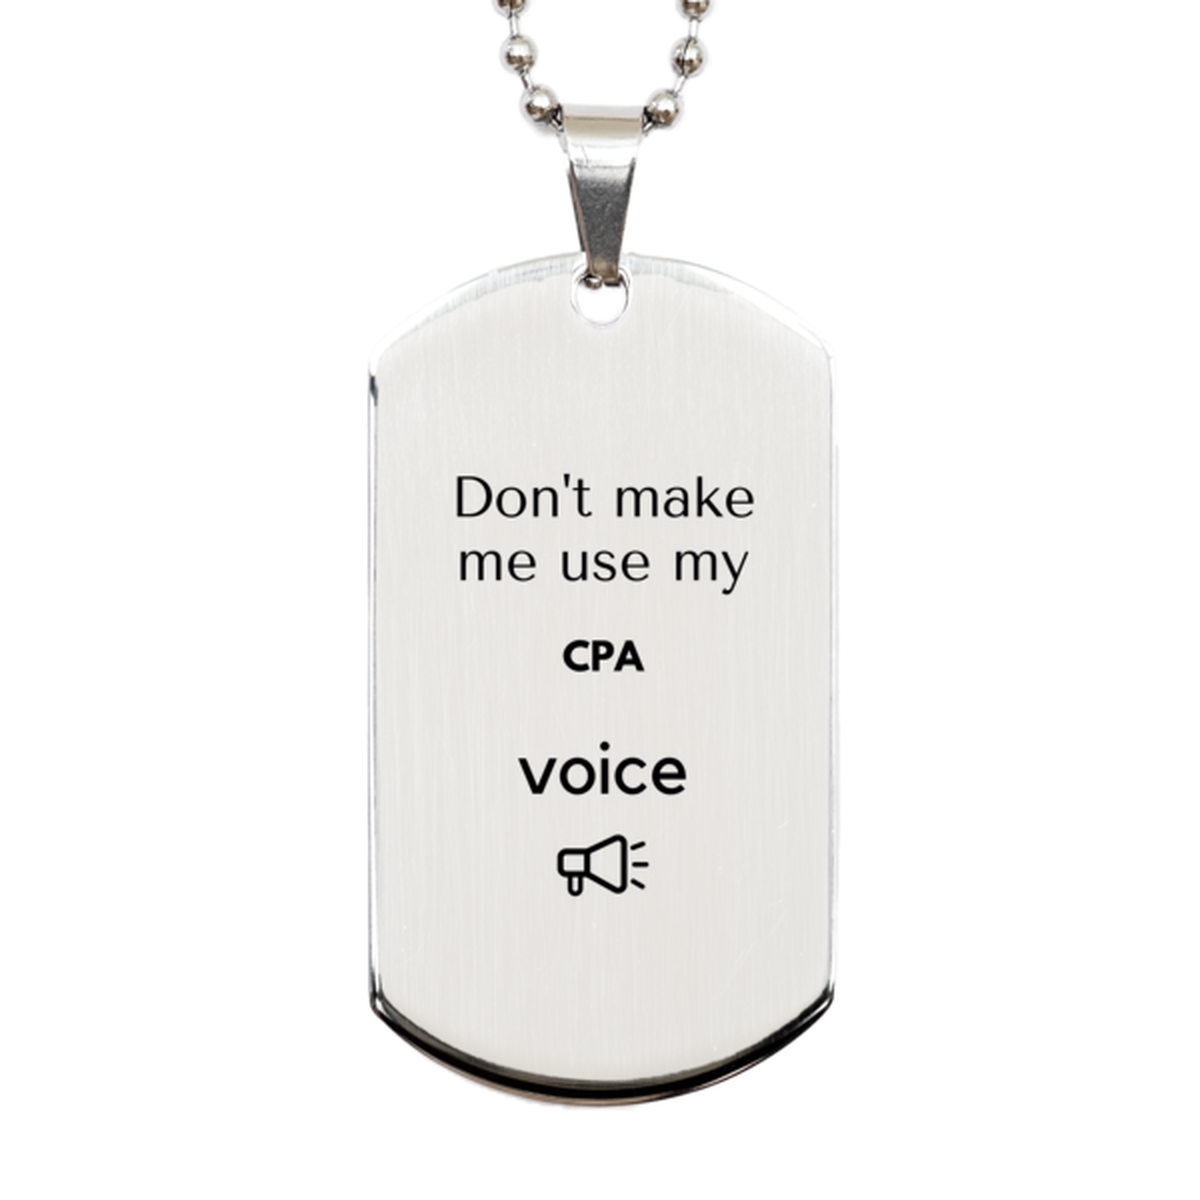 Don't make me use my CPA voice, Sarcasm CPA Gifts, Christmas CPA Silver Dog Tag Birthday Unique Gifts For CPA Coworkers, Men, Women, Colleague, Friends